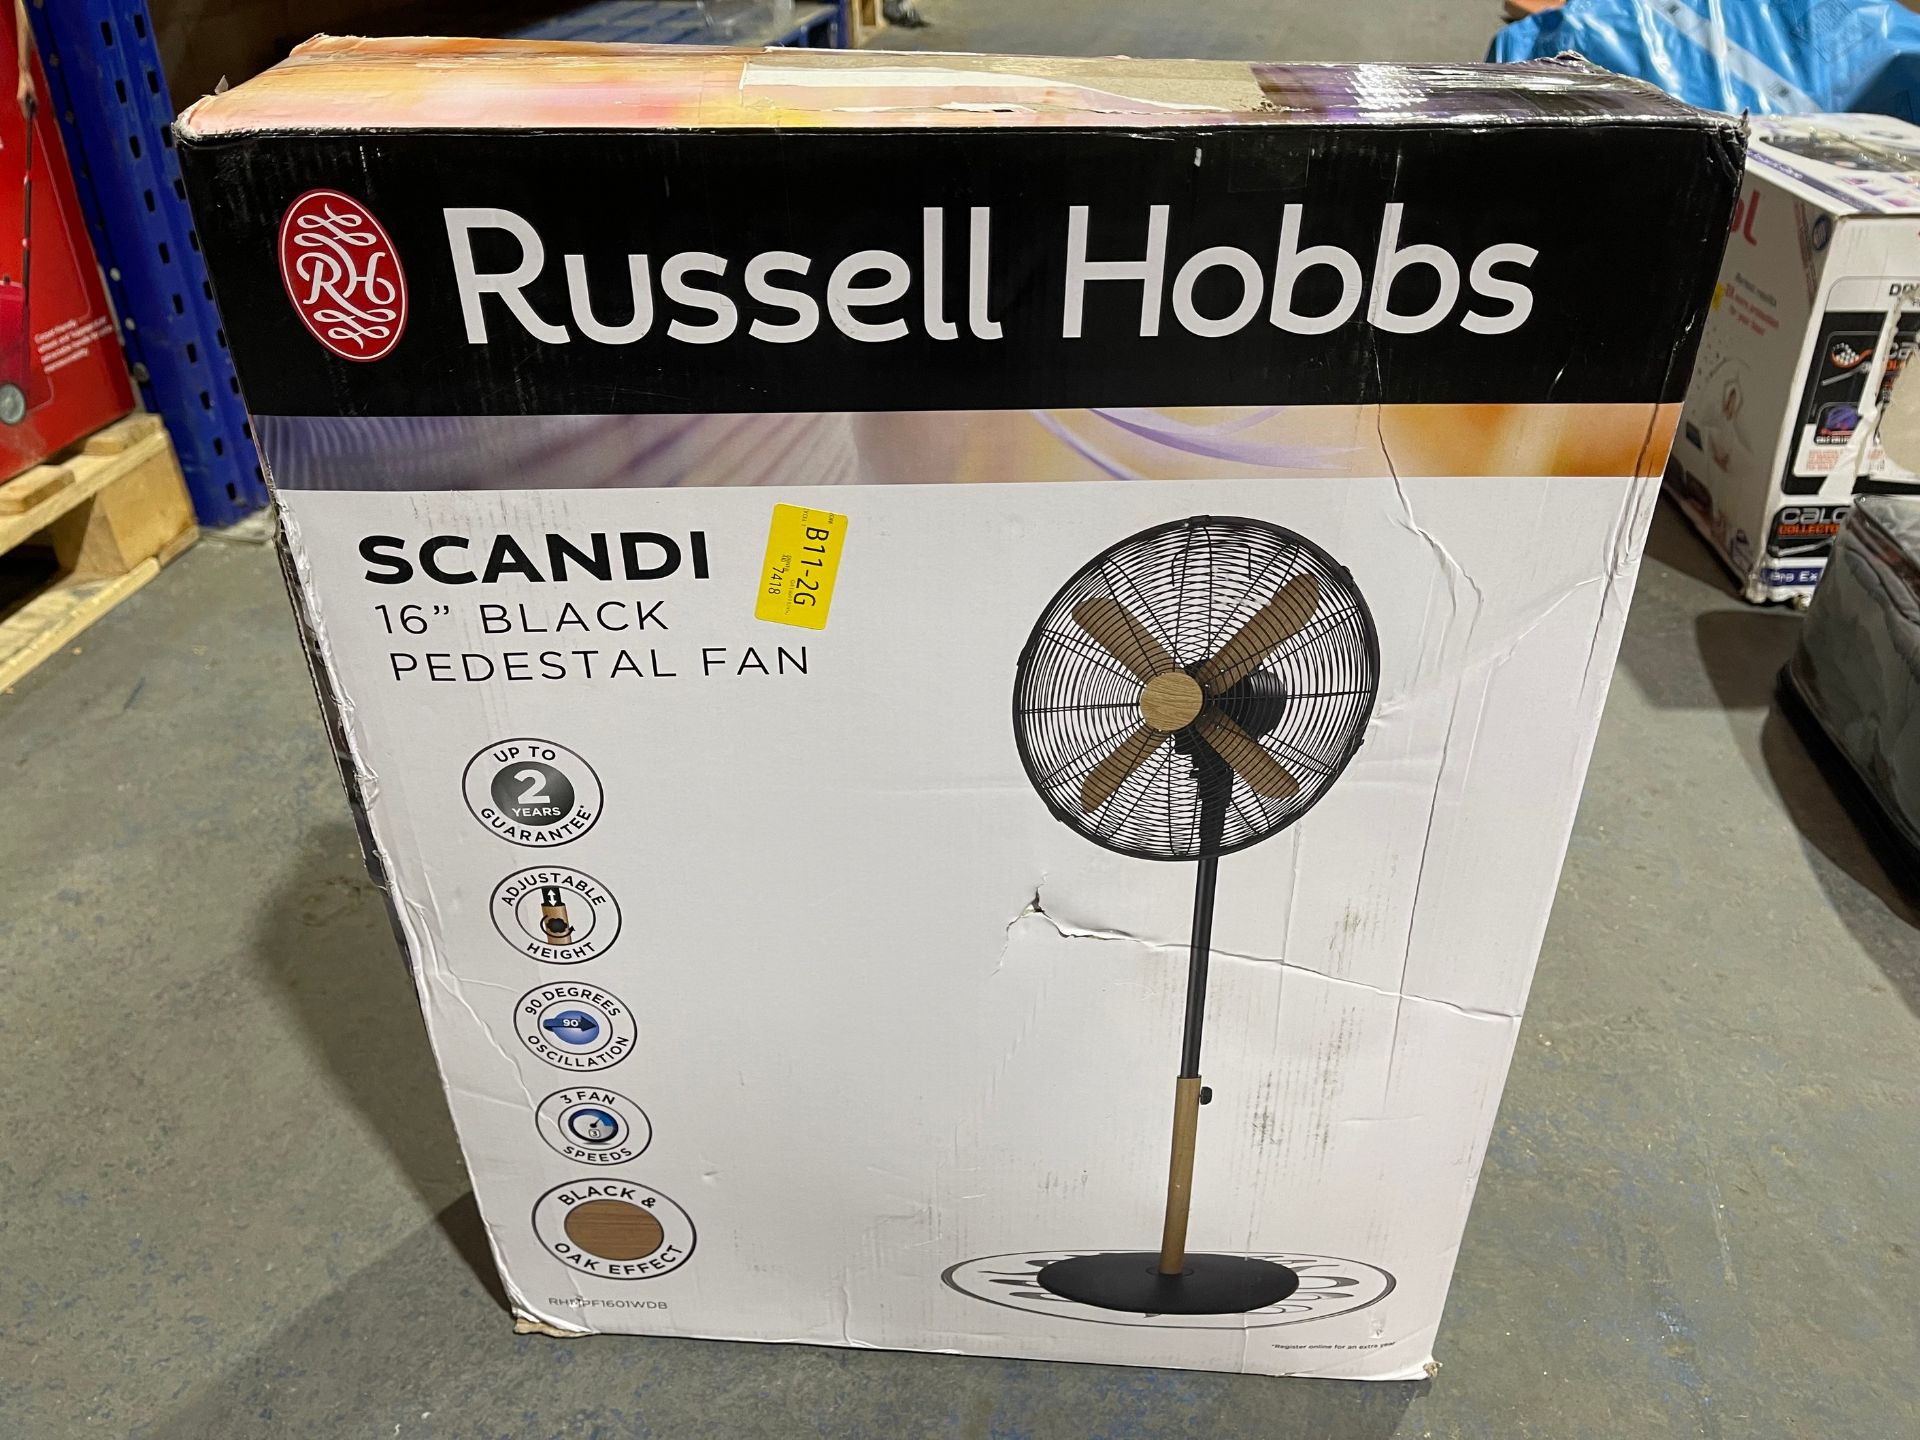 Russell Hobbs RHMPF1601WDB Pedestal Fan, 60 W, Black with Wood Effect Trim Â£52.52Condition - Image 2 of 2